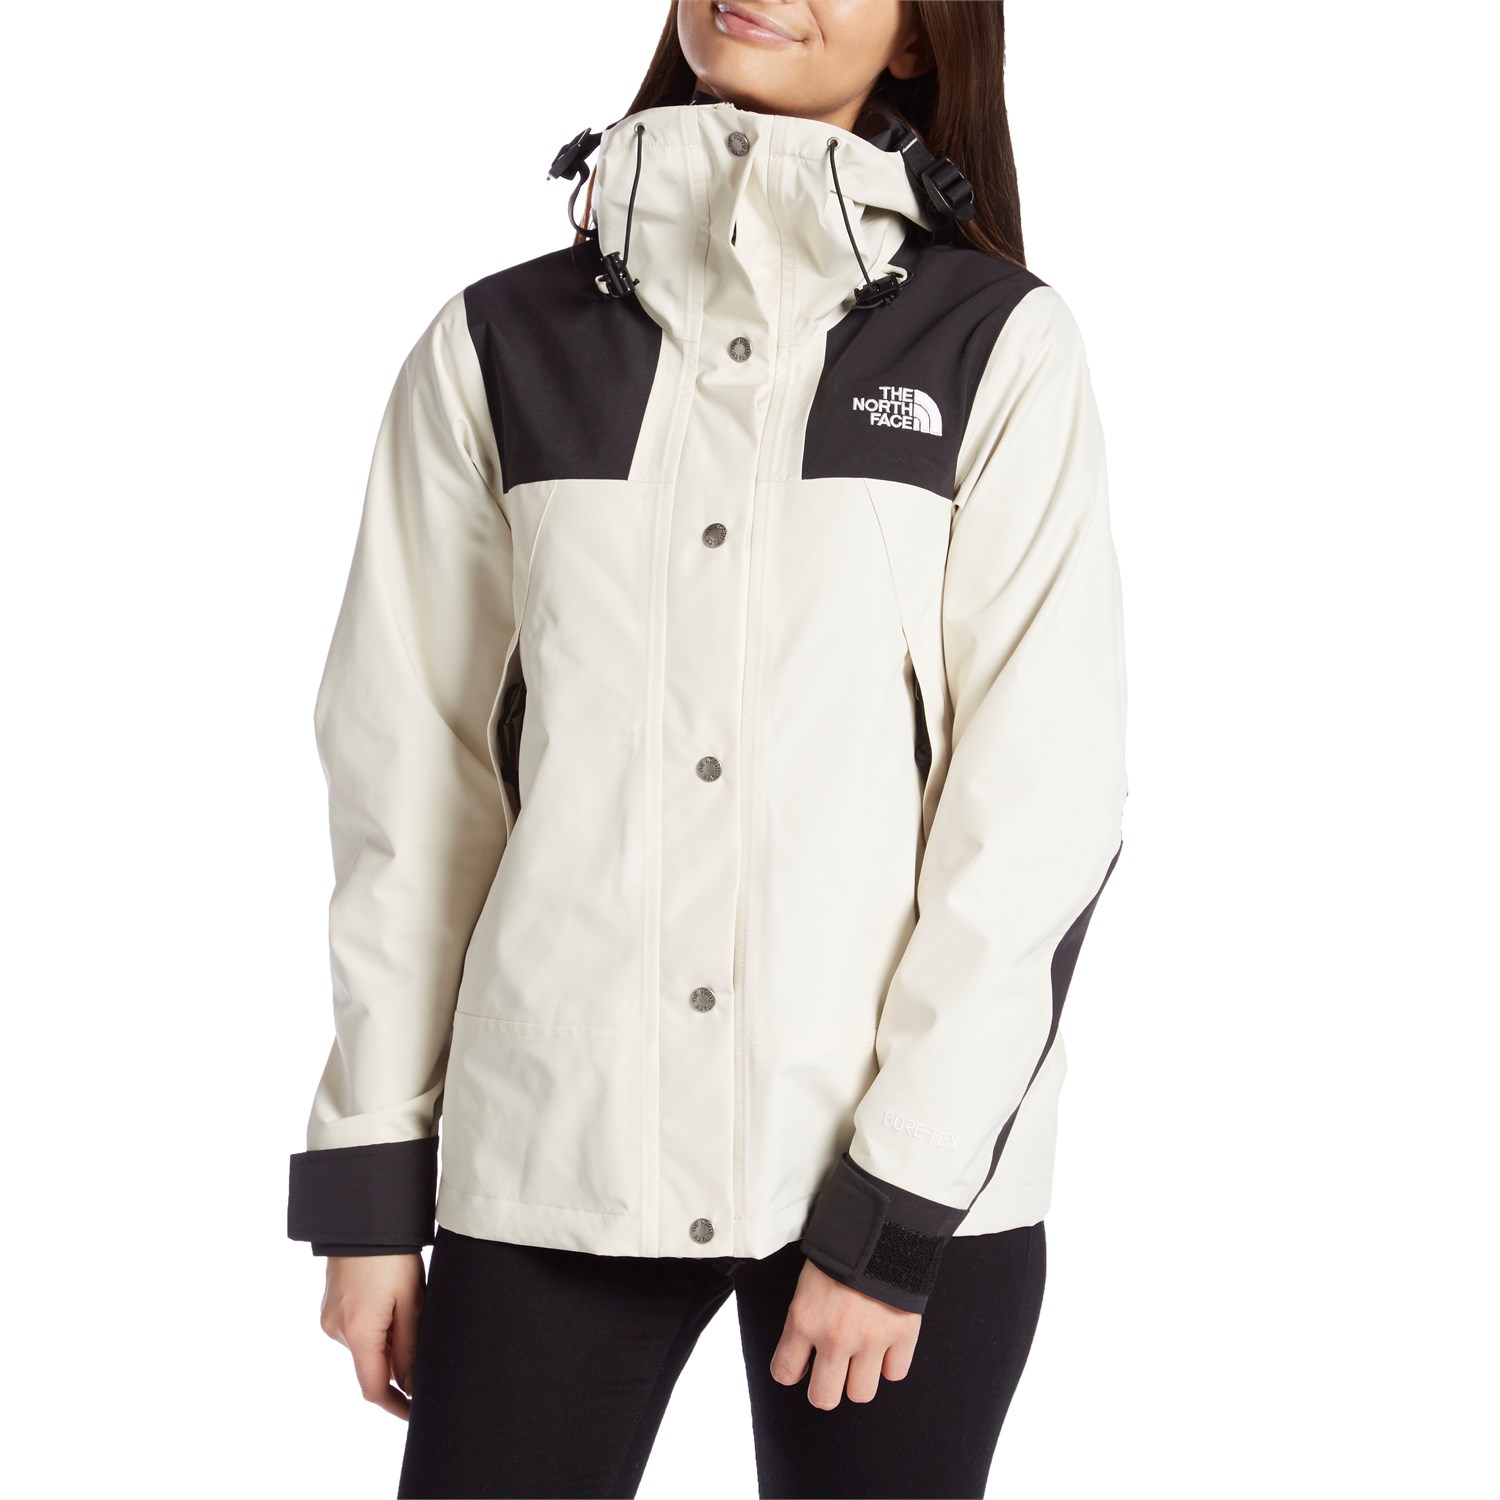 north face mountain jacket womens